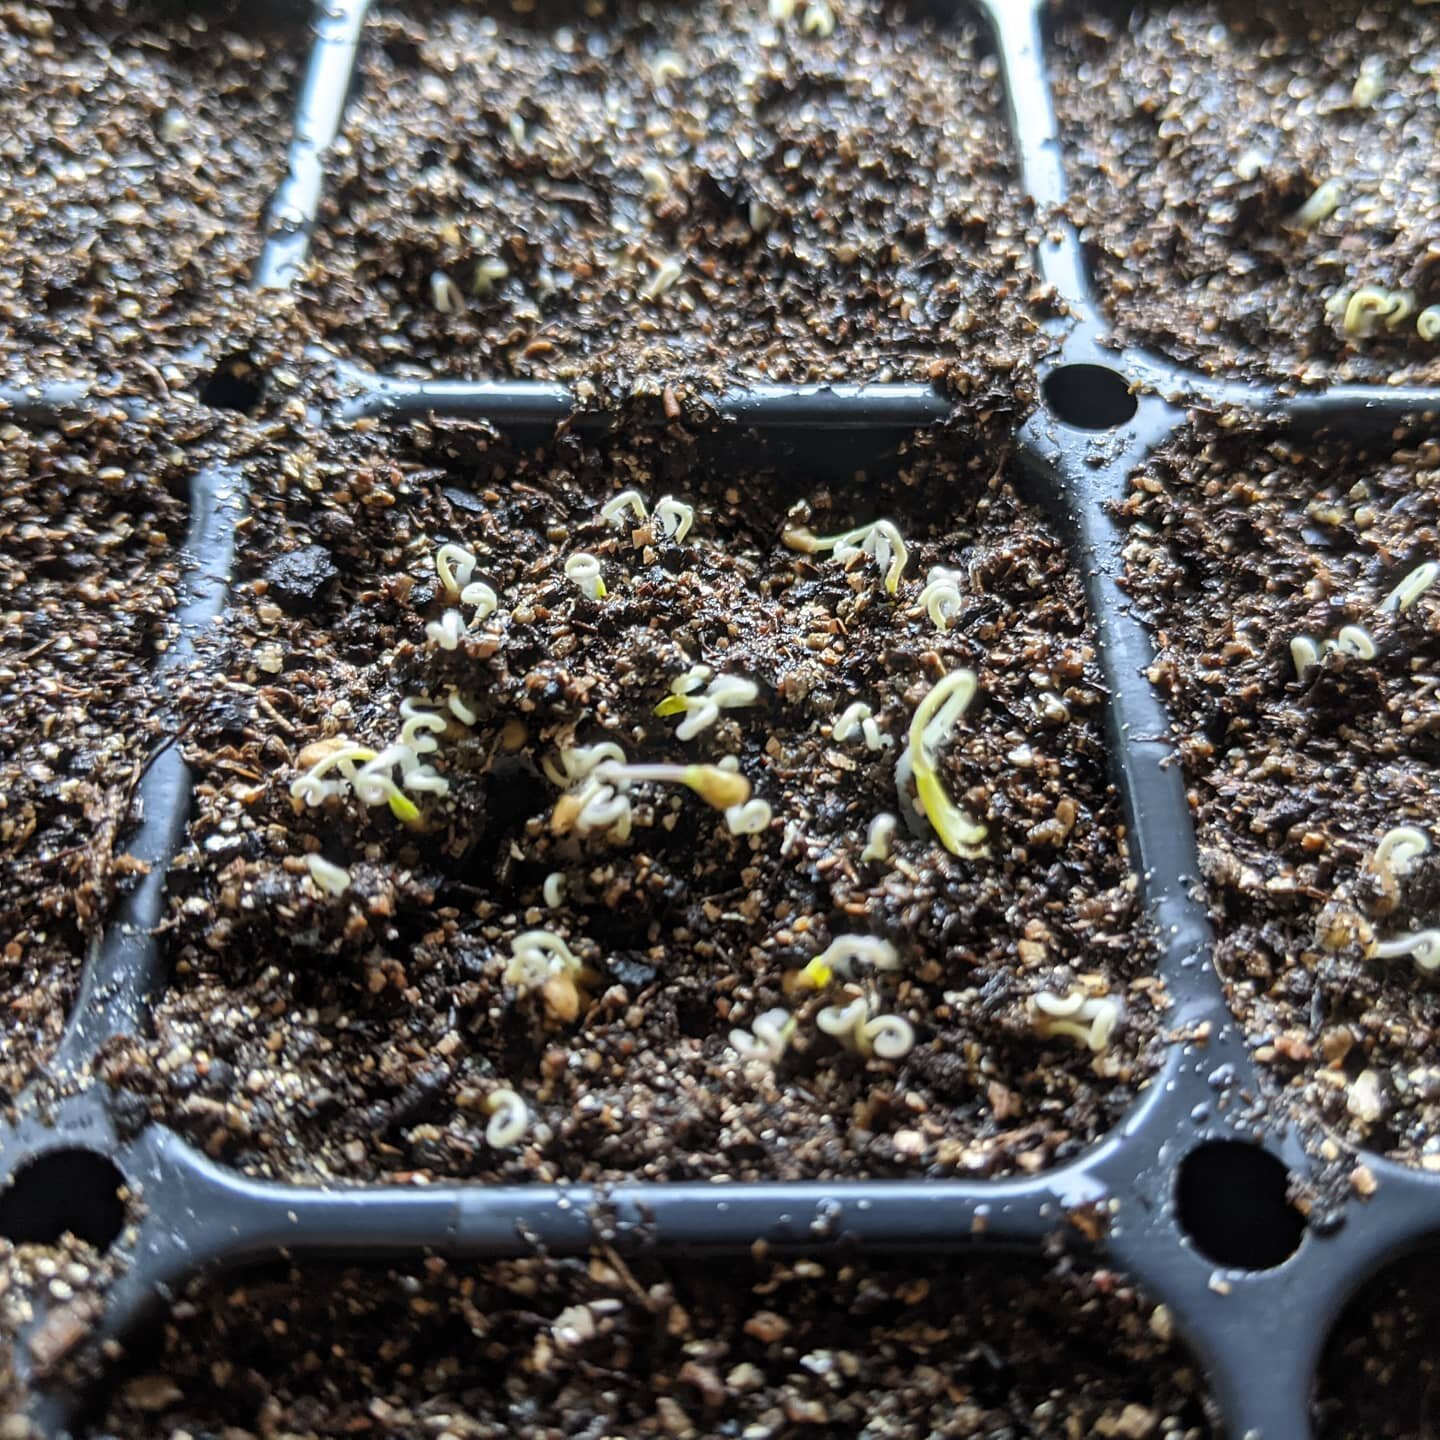 #tomato🍅 planting flat 1 day 3 -24 of 50 varieties up and growing. This is a cell of Sungold. Greens and flowers flat has 16 of 20 lettuce emerged. So far, so good! Off for a hike. #epictomatoes #2021hendersonvillegarden #fromthedrivewayandbeyond